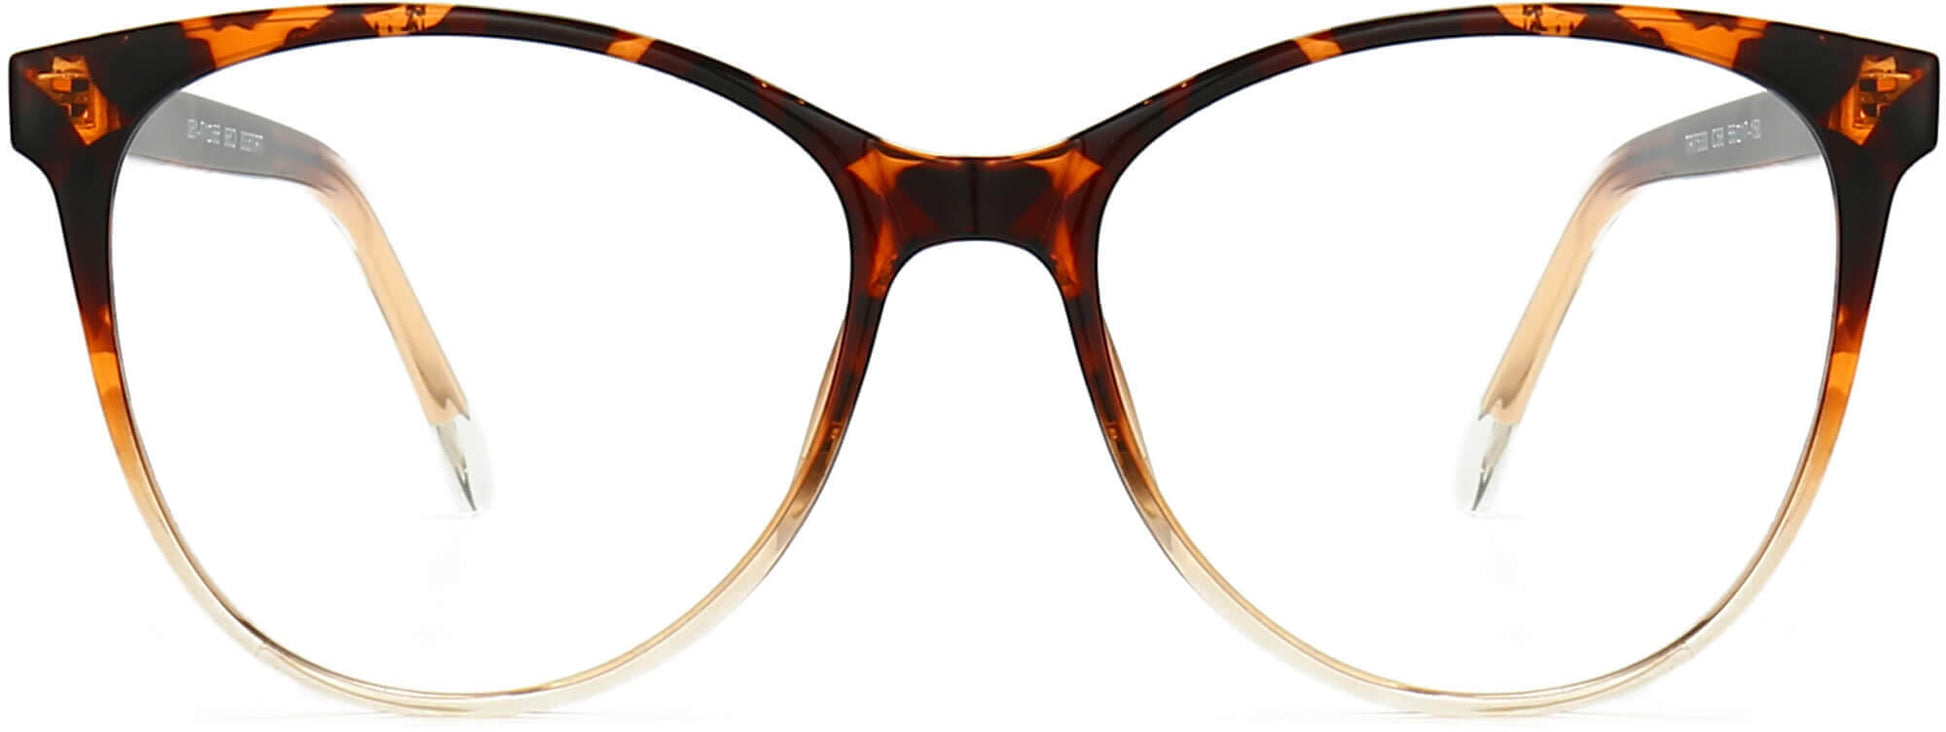 Everleigh Cateye Tortoise Eyeglasses from ANRRI, front view